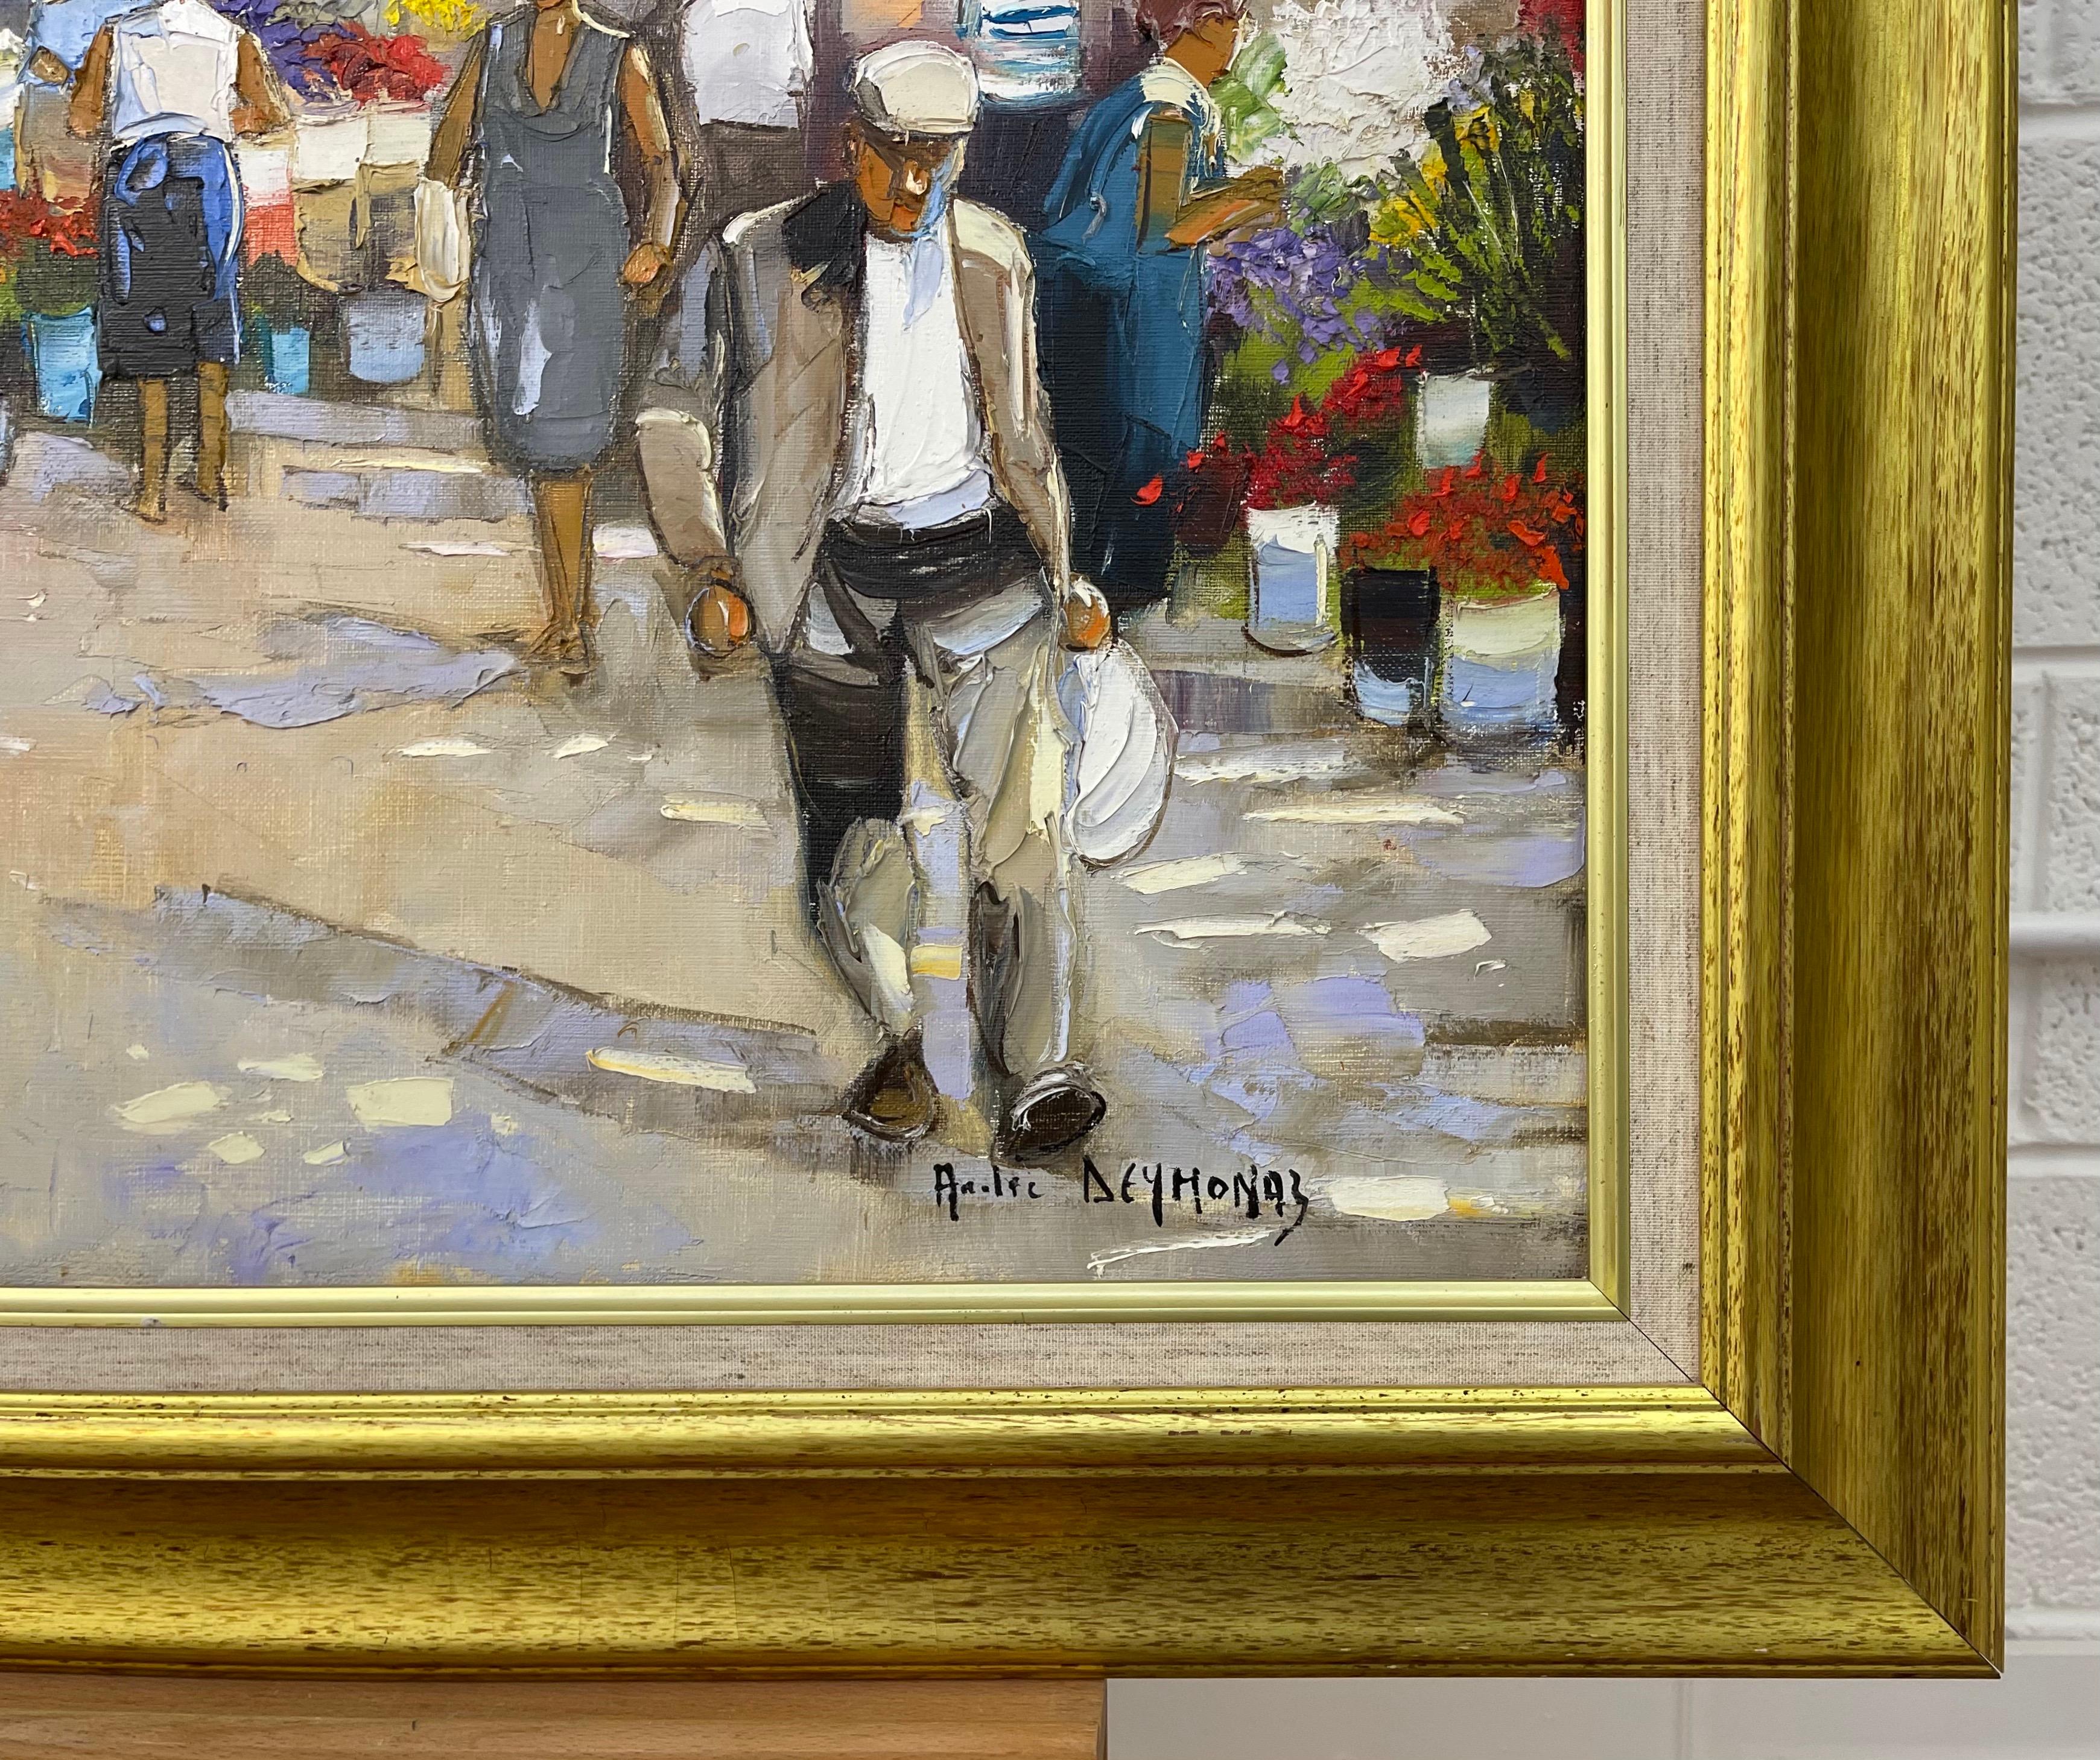 Original Oil Painting of Provence Flower Market by French Impressionist Artist André Deymonaz

Art measures 28 x 24 inches 
Frame measures 34 x 29 inches 

André Deymonaz, French painter, was born in Casablanca, Morocco, in 1946. The Deymonaz family